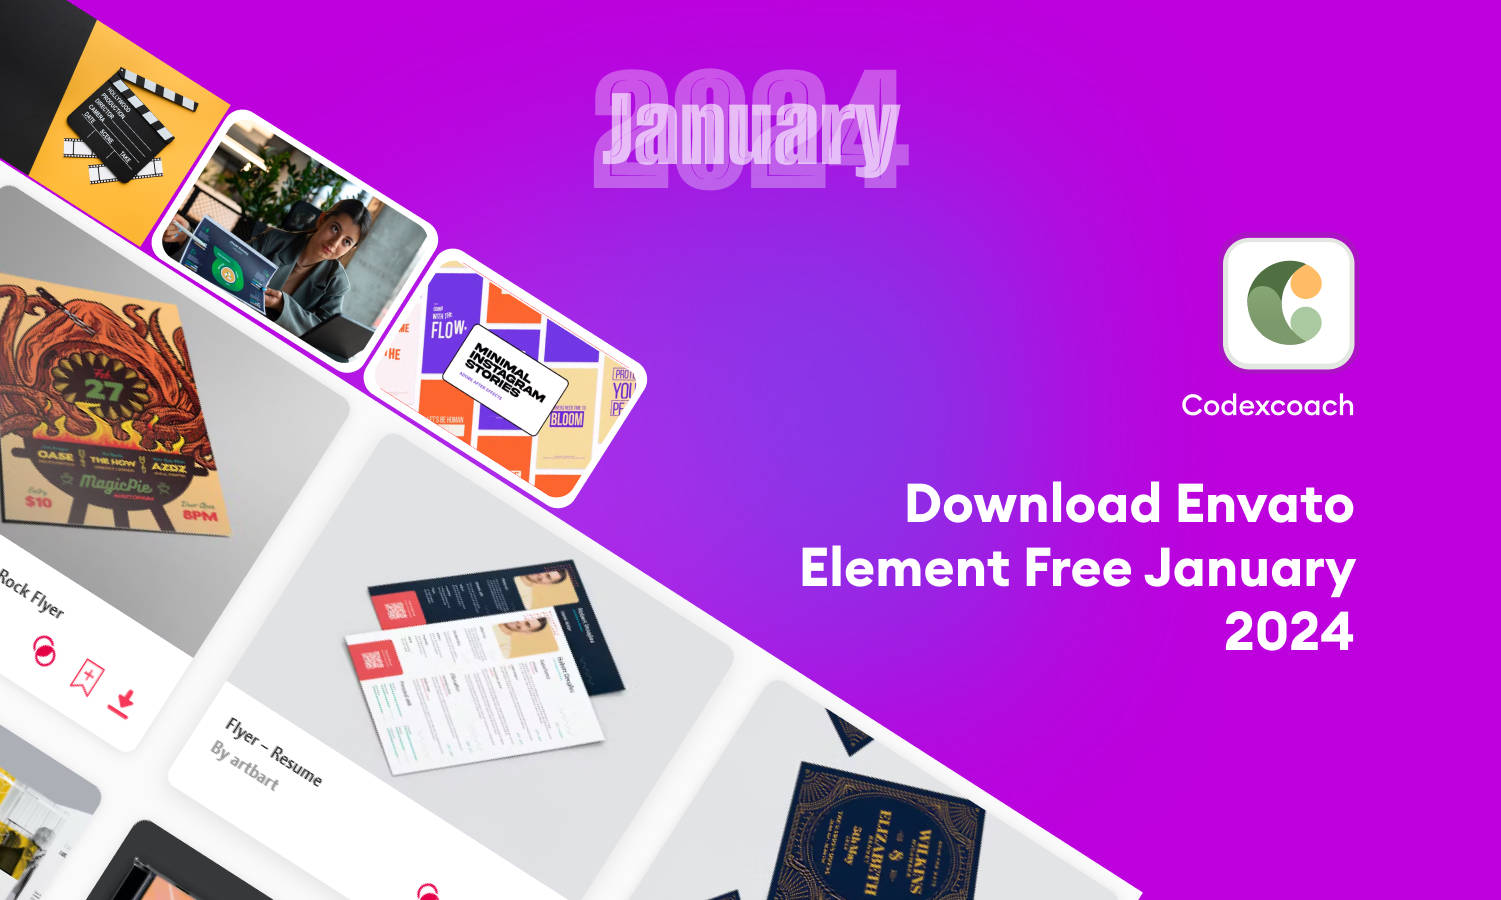 Download Envato Element Free January 2024